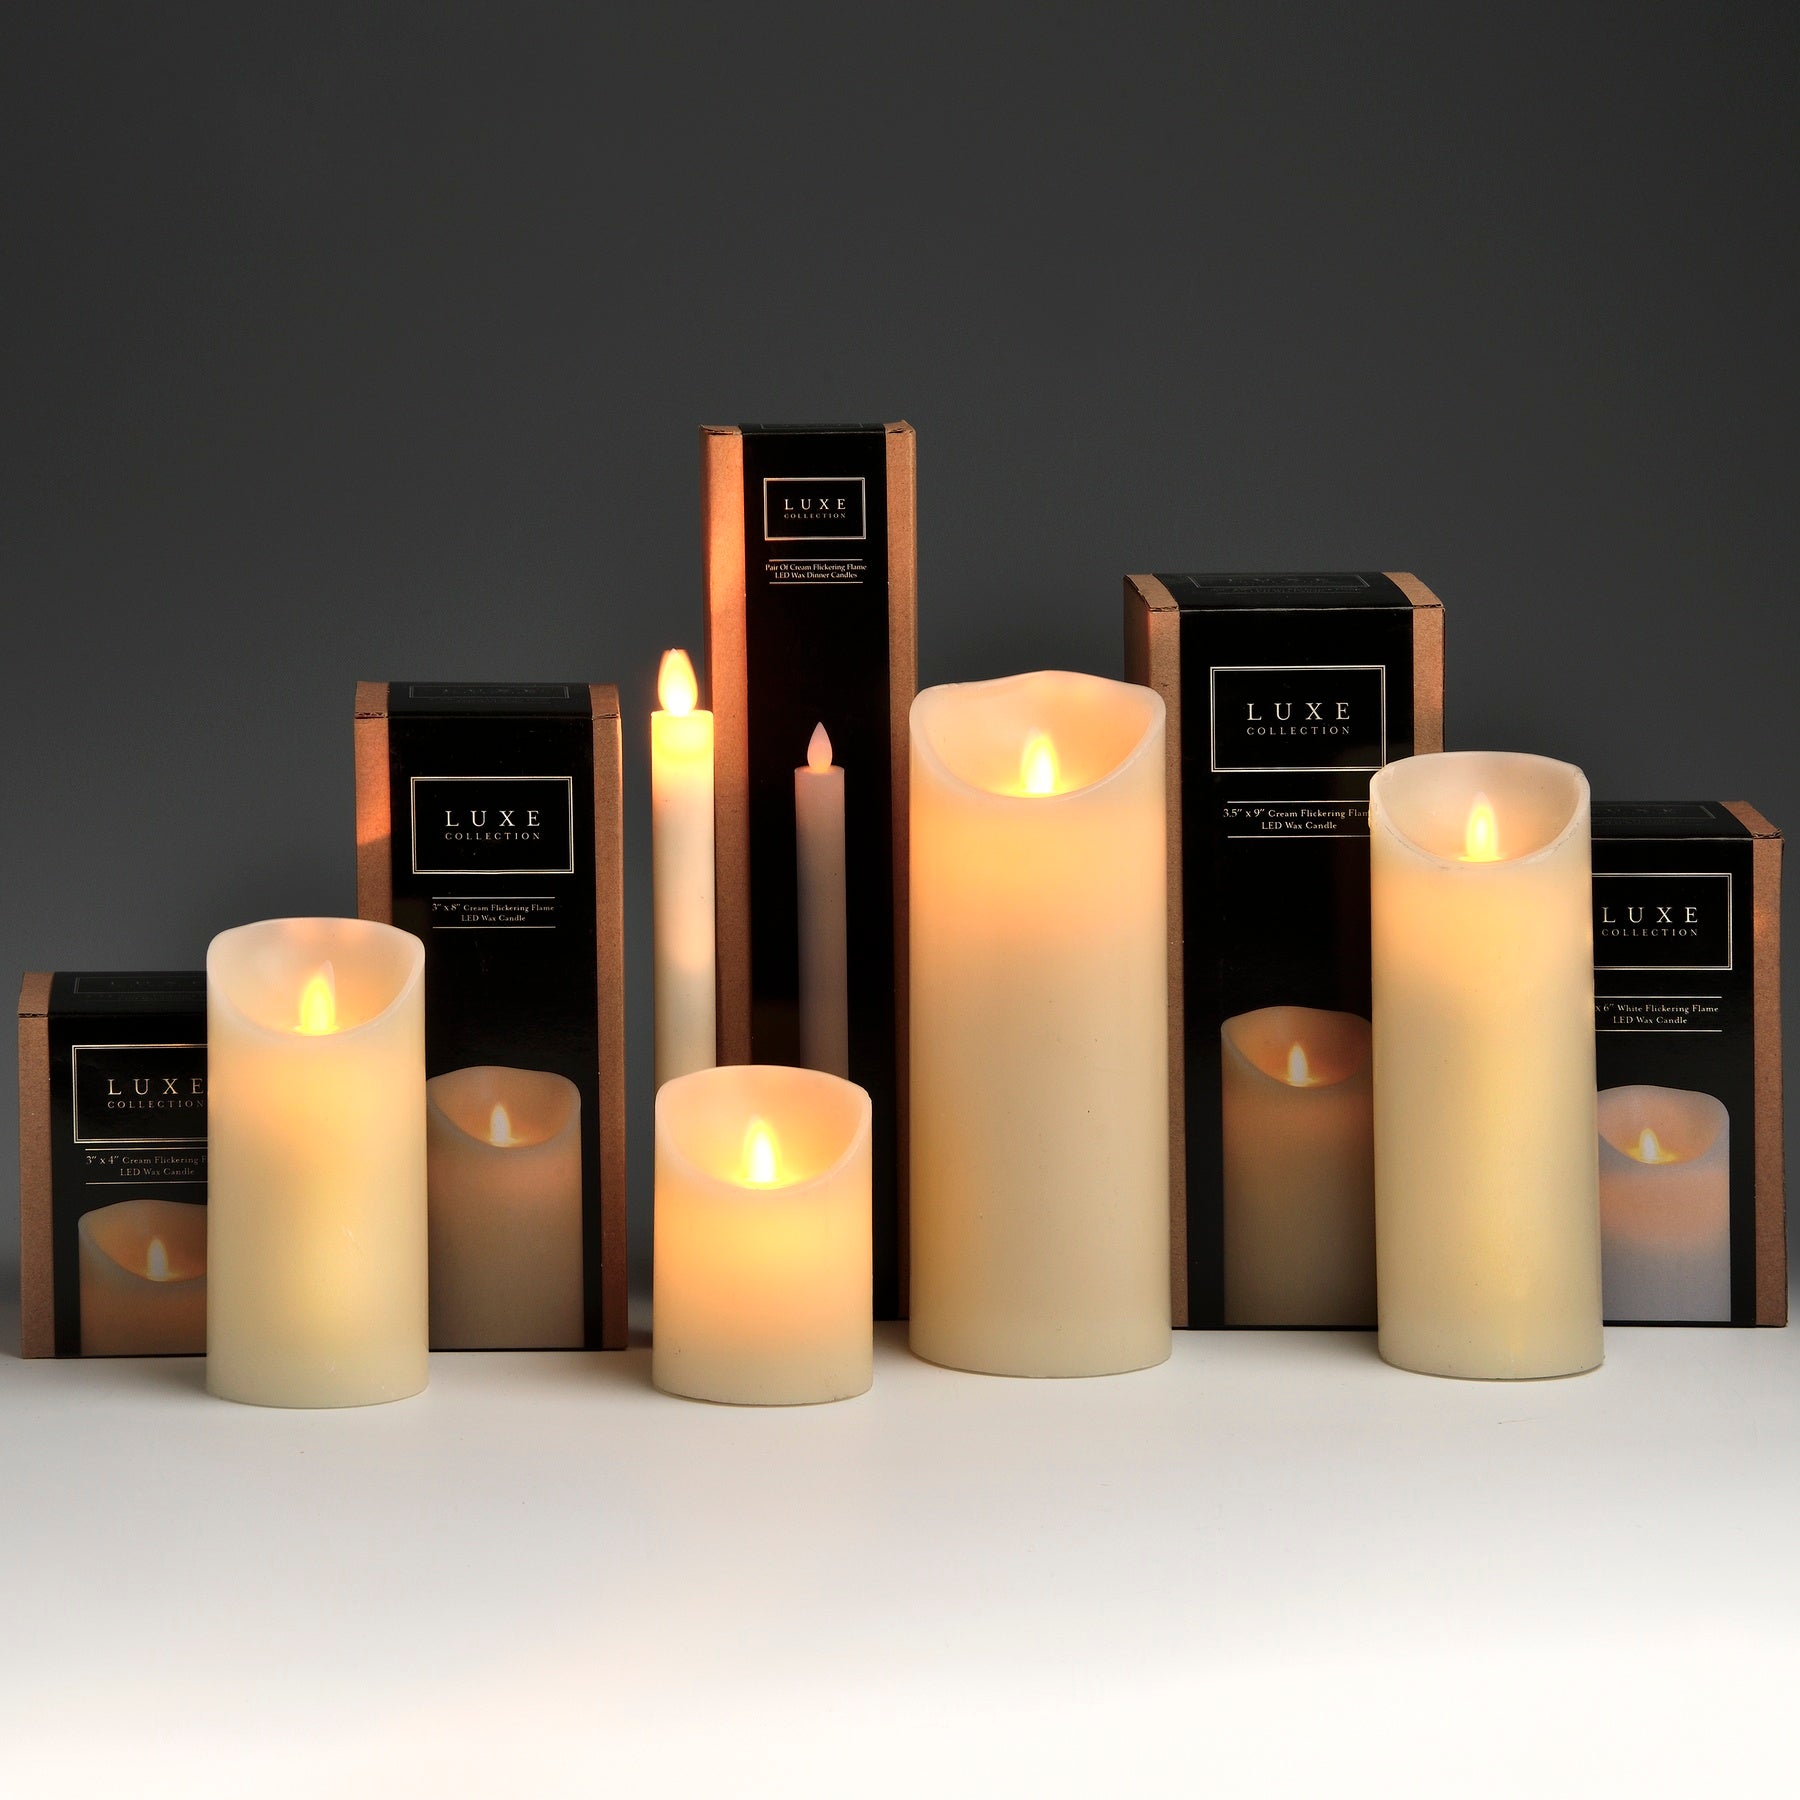 Luxe Collection 3 x 6 Cream Flickering Flame LED Wax Candle